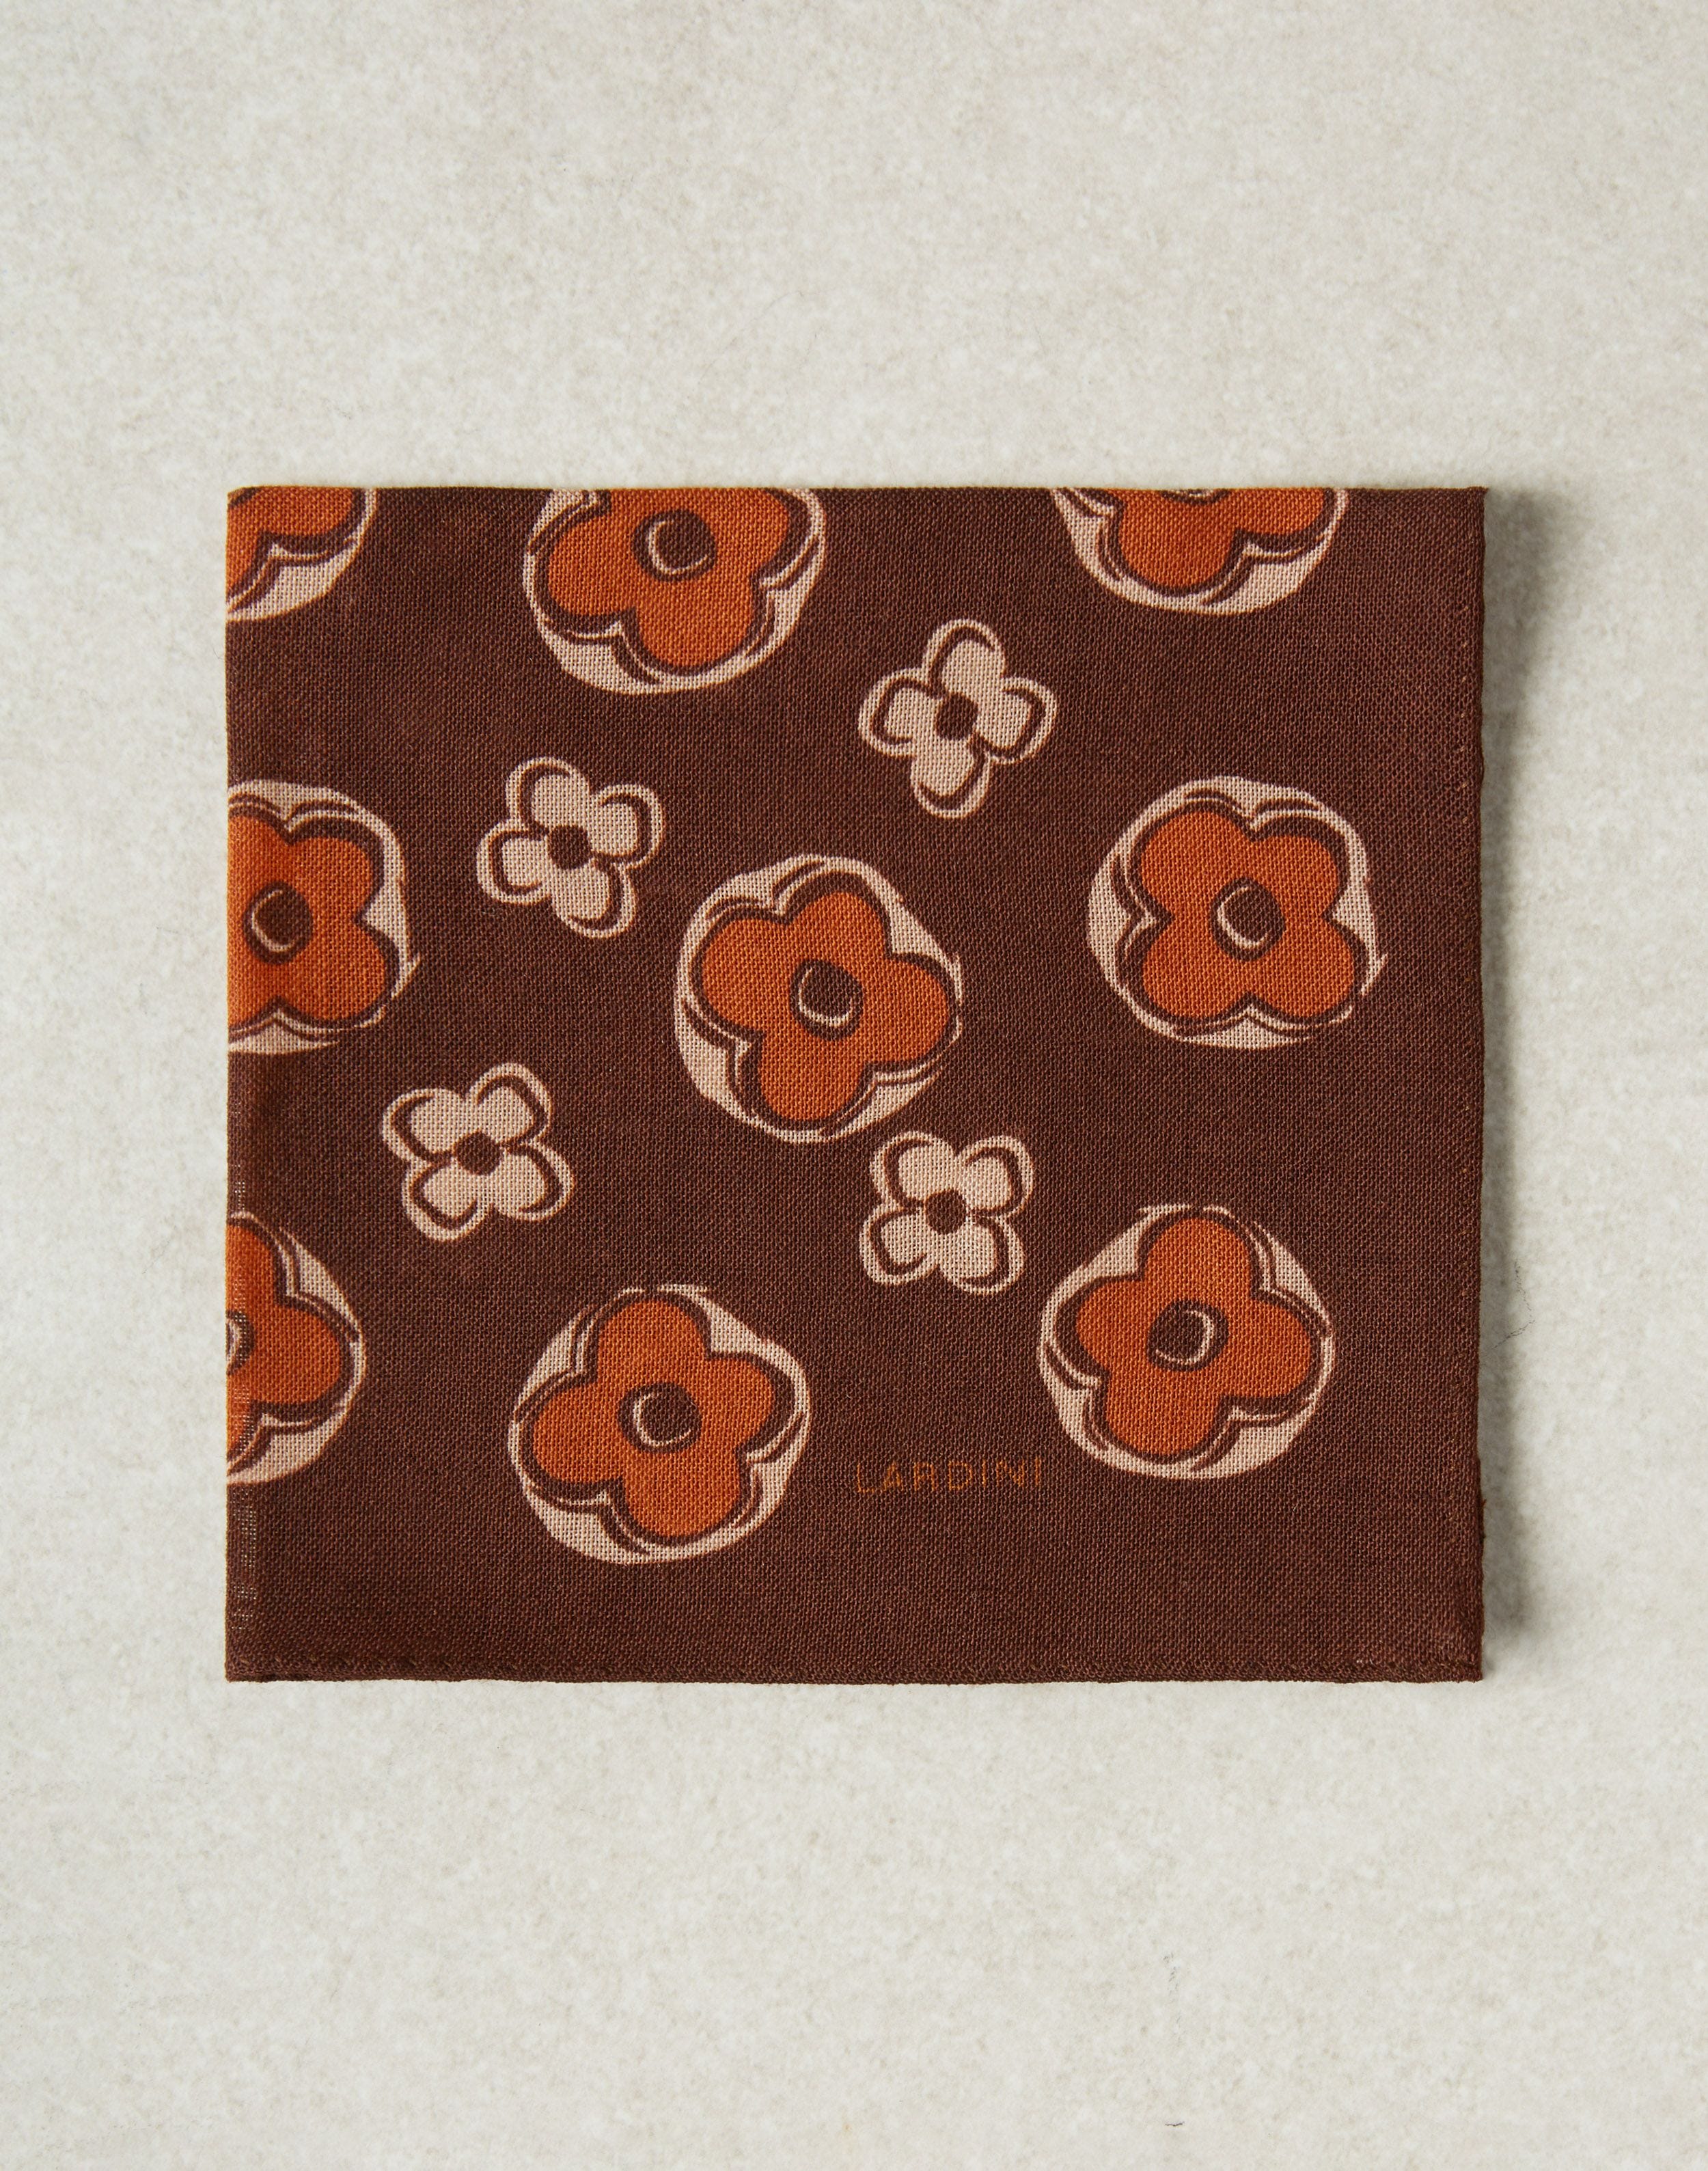 Brown and orange pocket square with a flower print